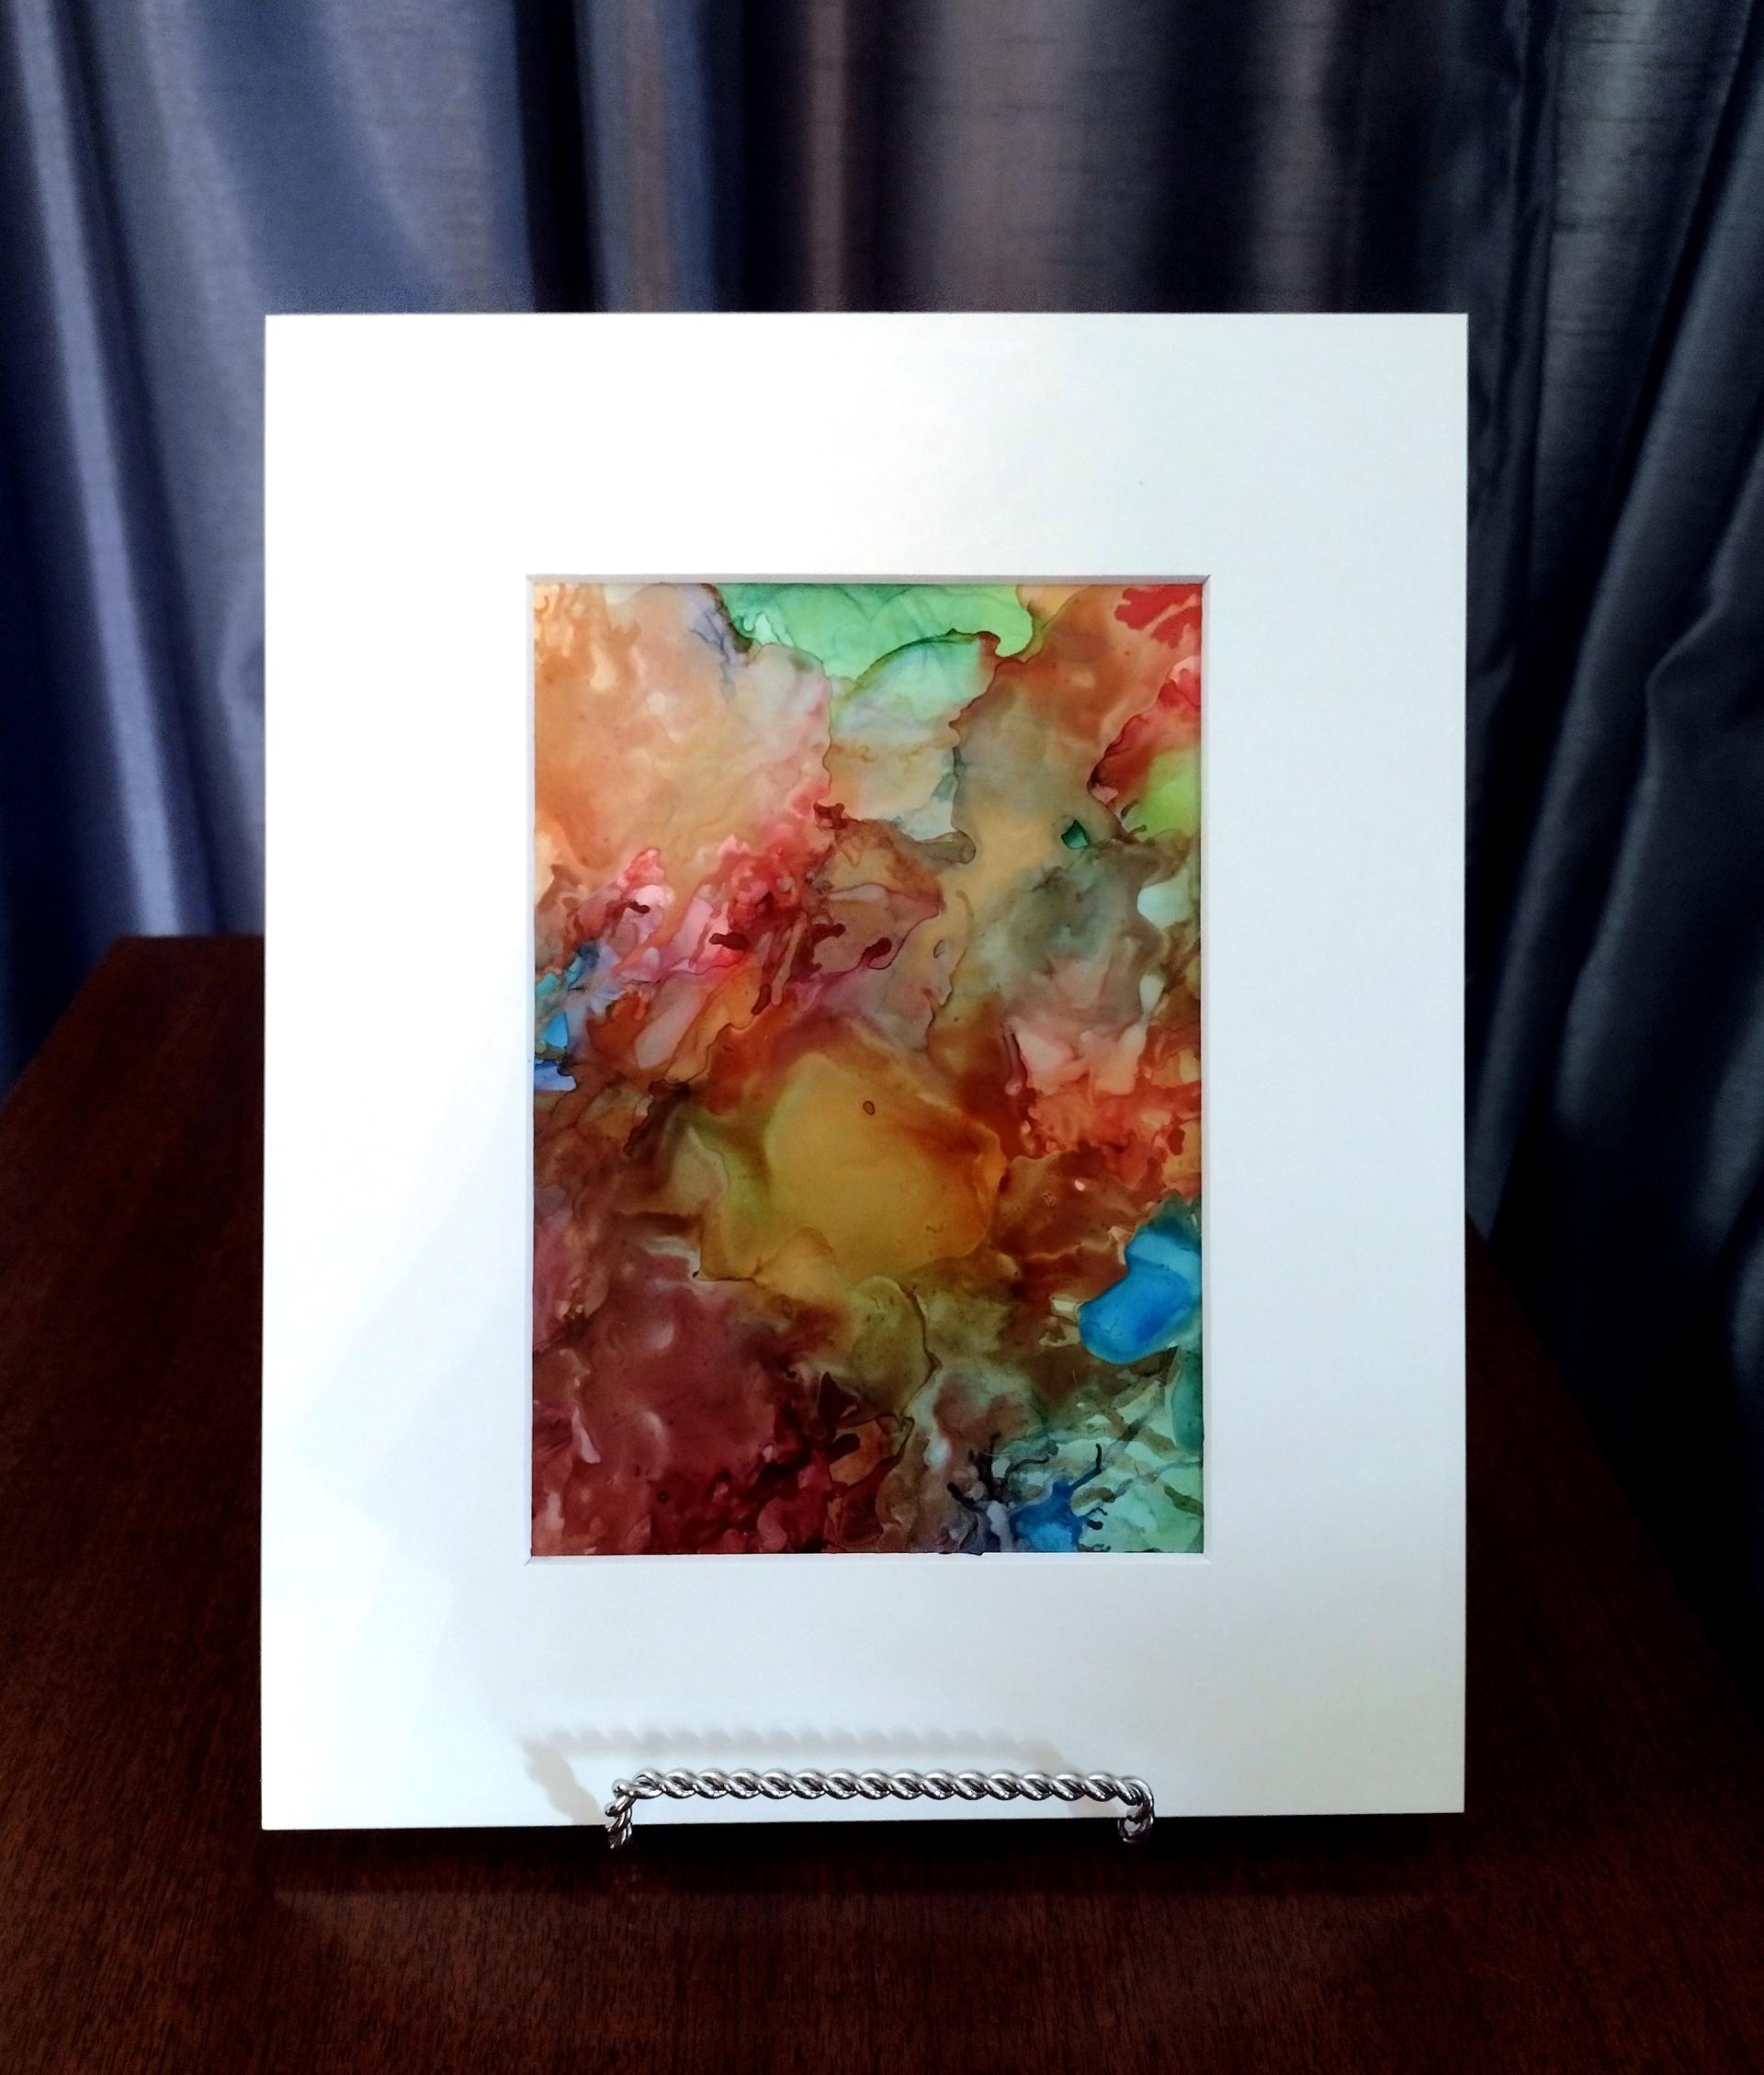 Alcohol Ink Painting, 5 x 7 Matted to 8 x 10, Rainbow Metallic Abstract Art